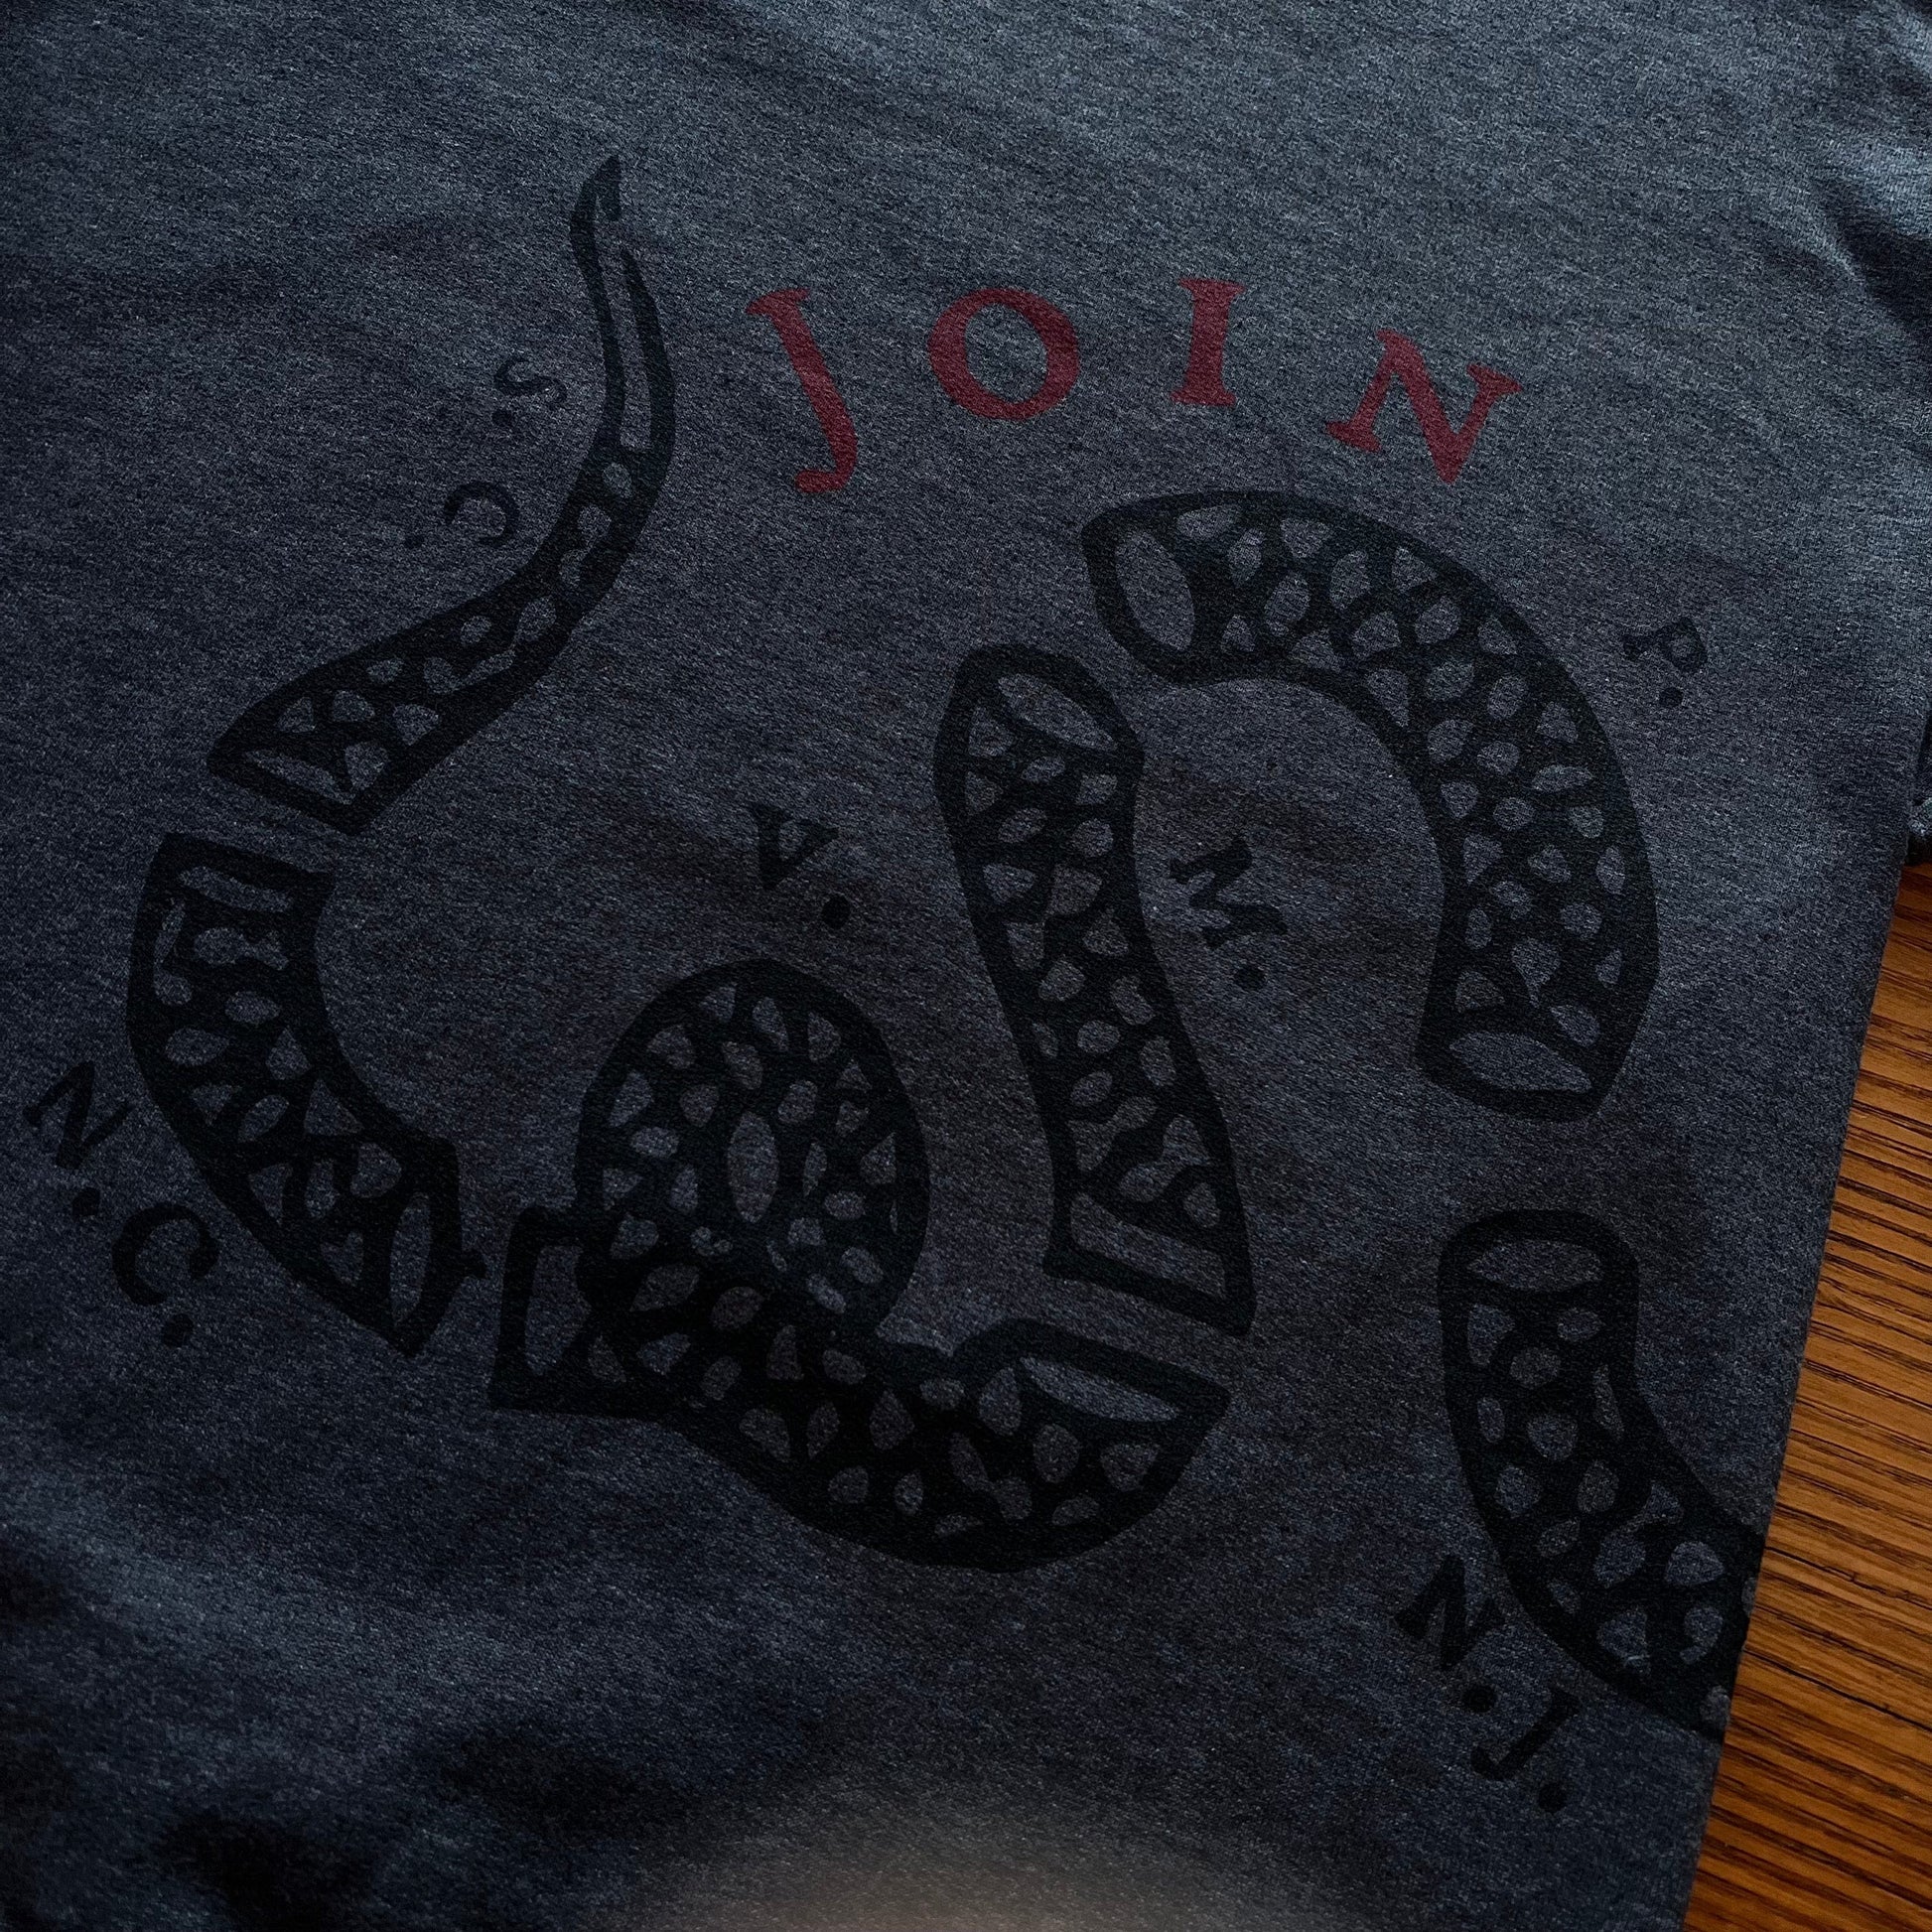 "Join or Die" V-neck shirt -  from the history list store